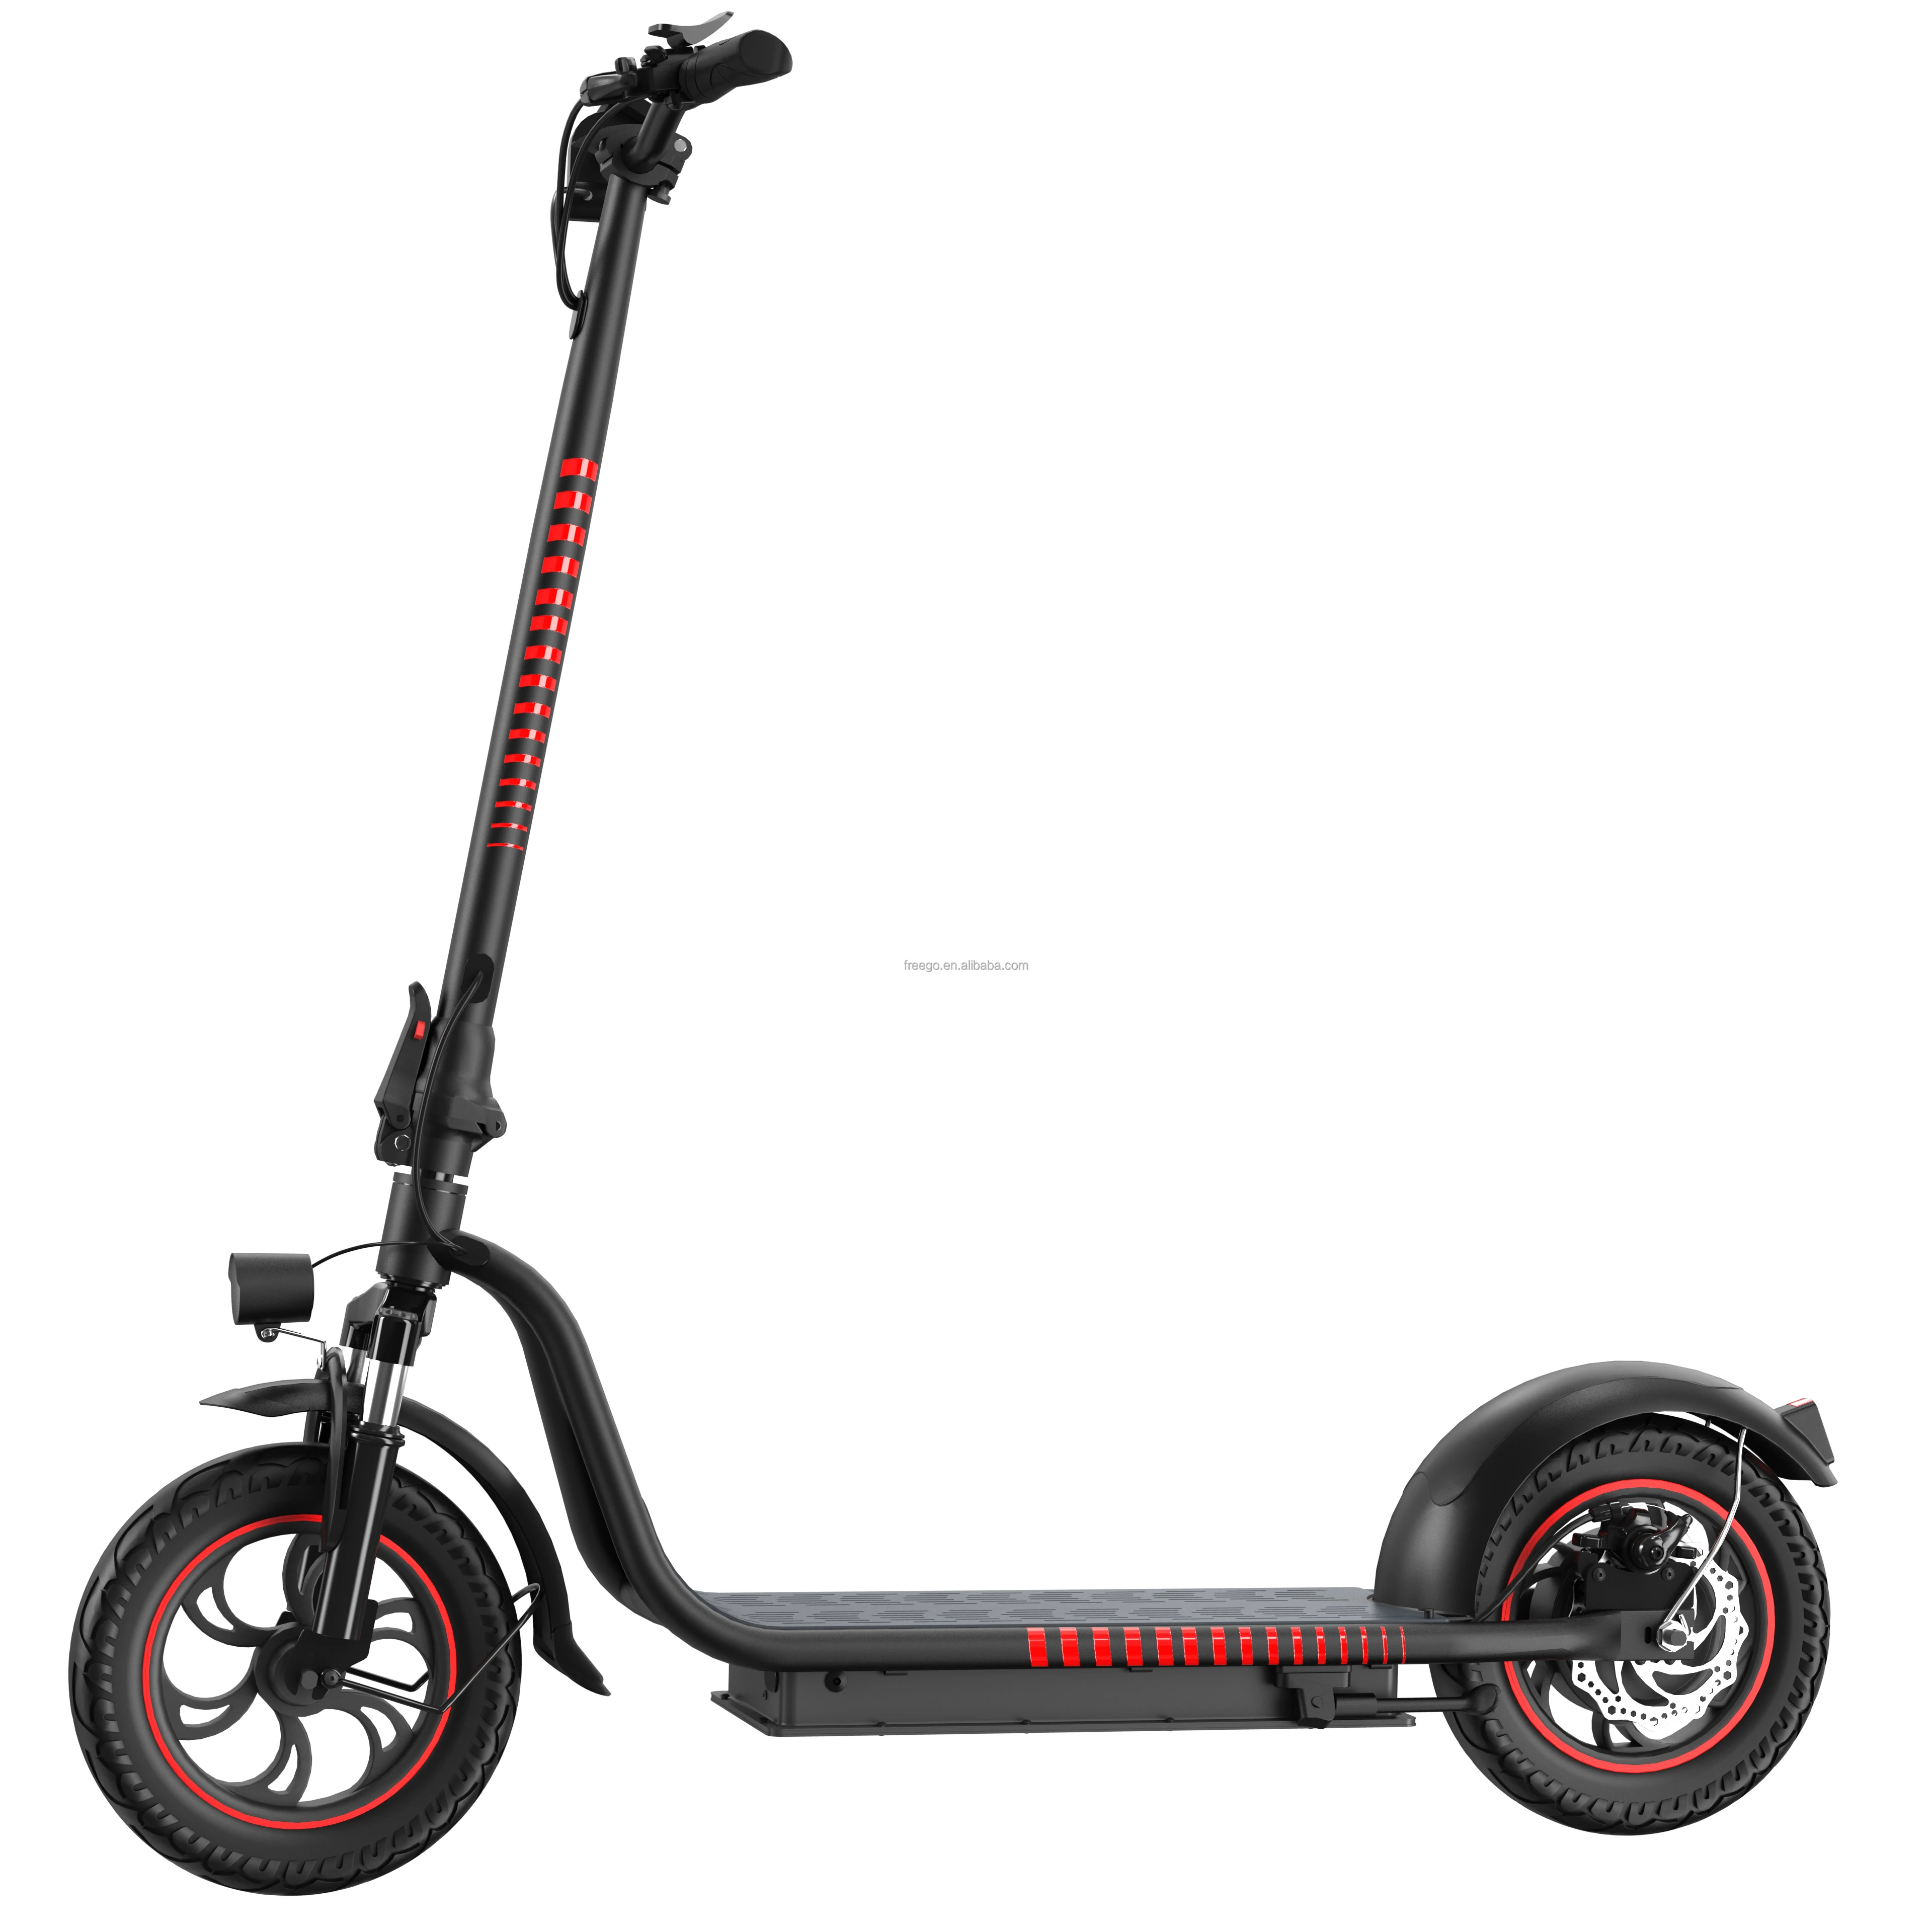 Nautisch winter Vol 12 Inch Big Wheels Scooters Electric 48v 500w Strong Power Electric Scooter  For Adult - Buy Big Wheels Scooters Electric,Electric Scooter For Adult,48v  500w Electric Scooter Product on Alibaba.com